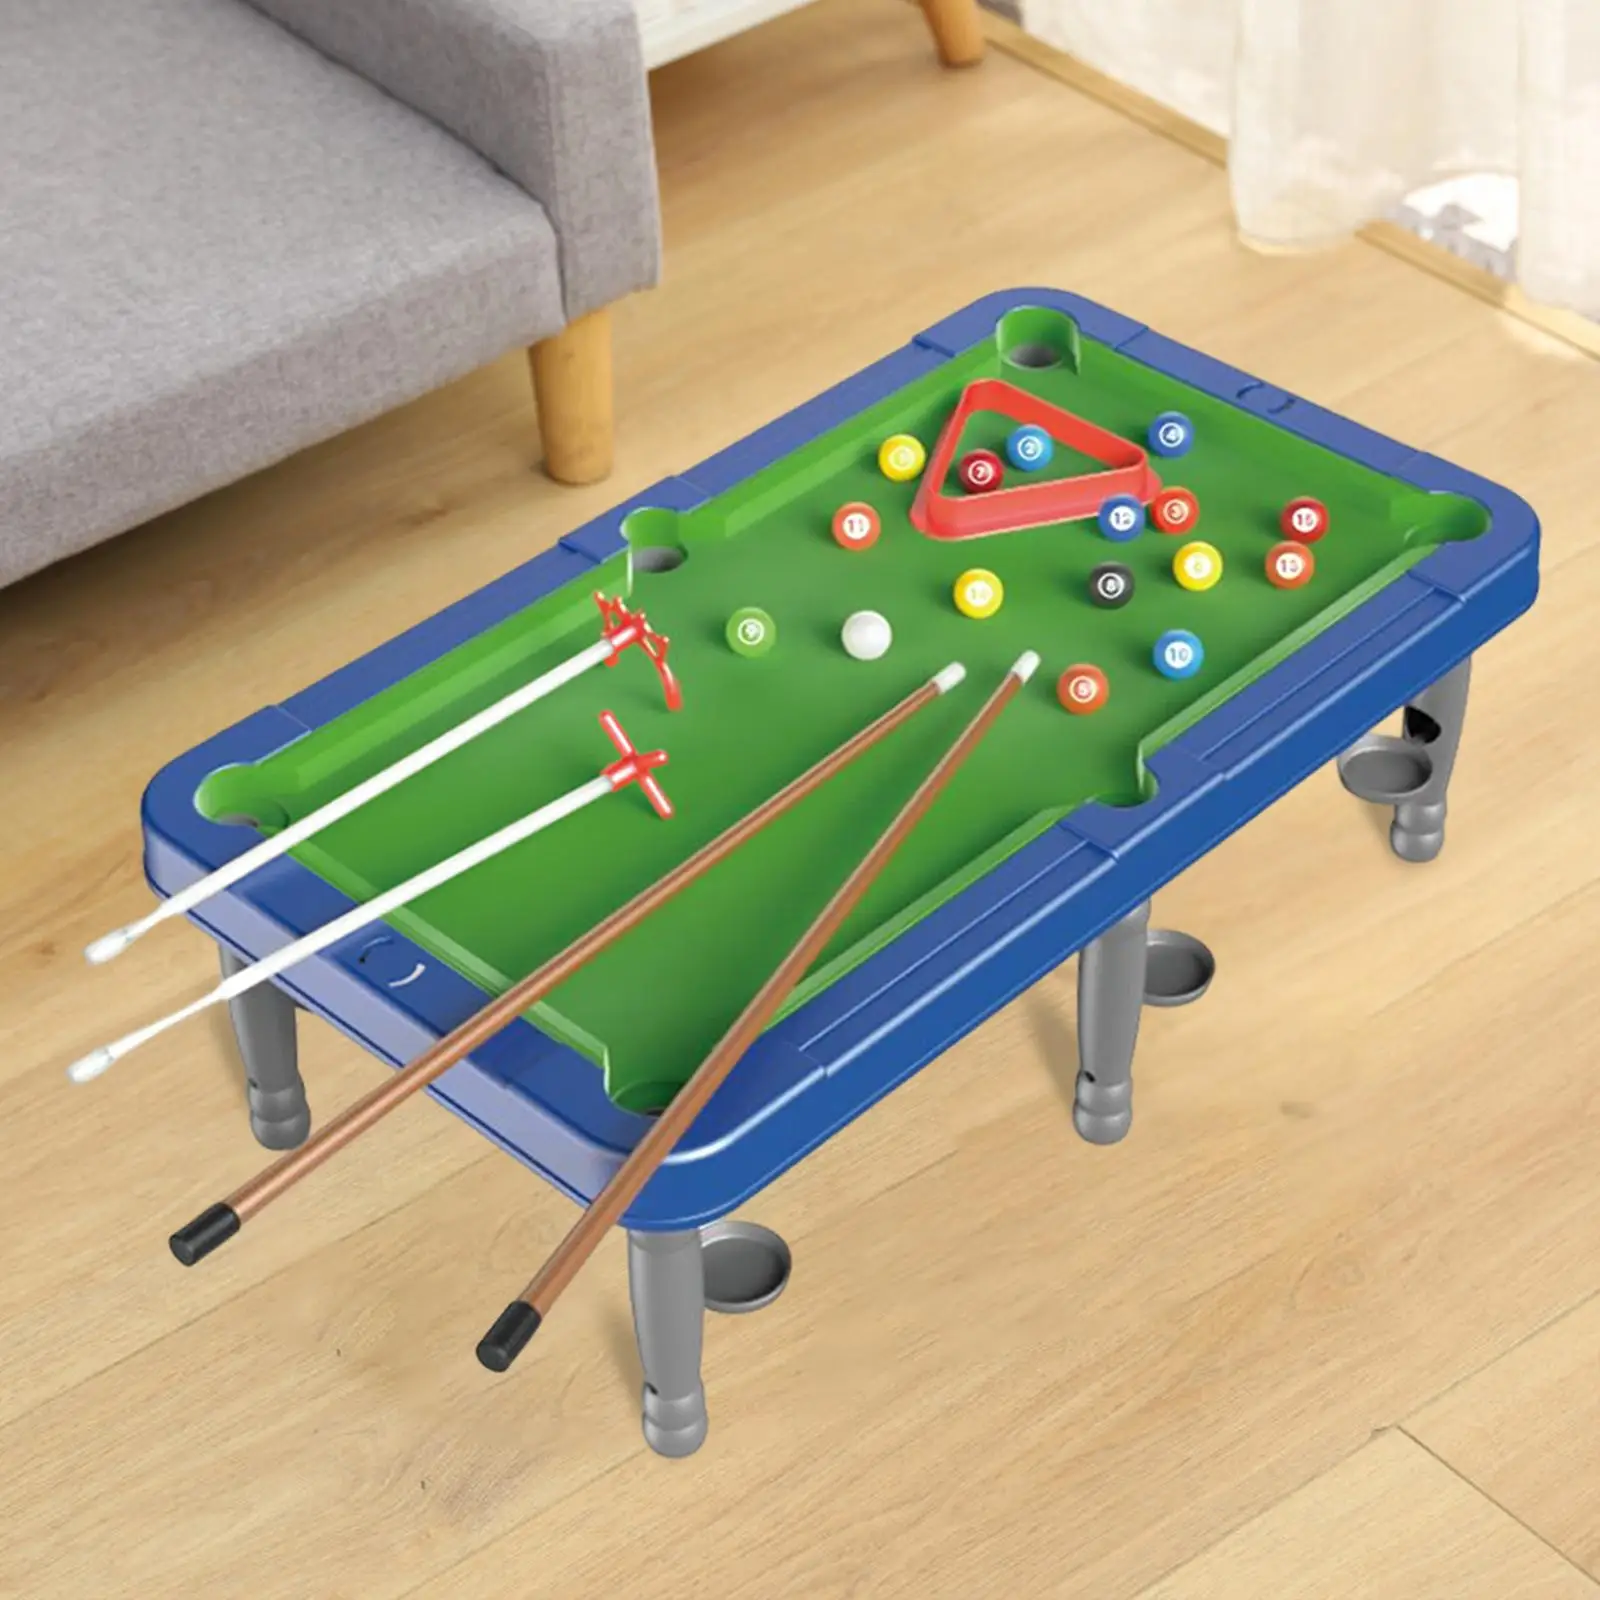 Portable Tabletop Billiards Home Use Chalk, Racking Triangle Indoor Game Toy Billiard Cues Pool Table Set for Children Family